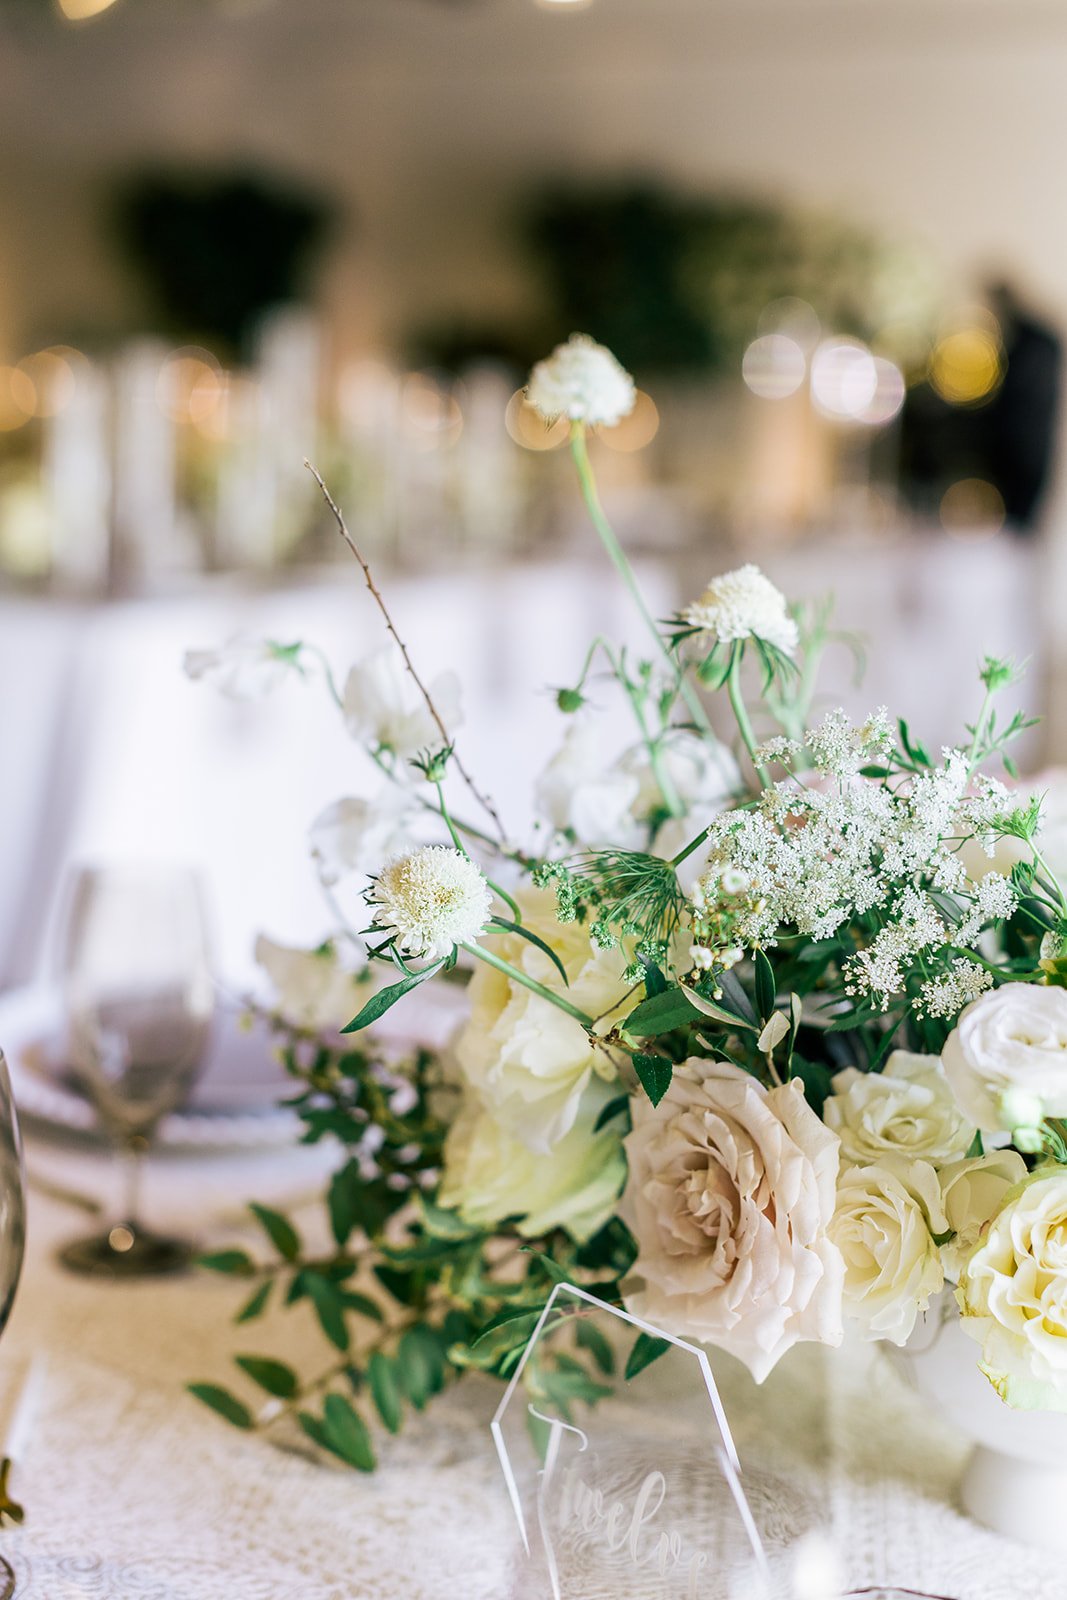 Low floral centerpieces for elegant wedding overflowing with white garden roses, ranunculus, butterfly ranunculus, scabiosa, lisianthus, sweet peas, and natural dark greenery. Floral hues of white, cream, and blush. Designed by Rosemary and Finch in